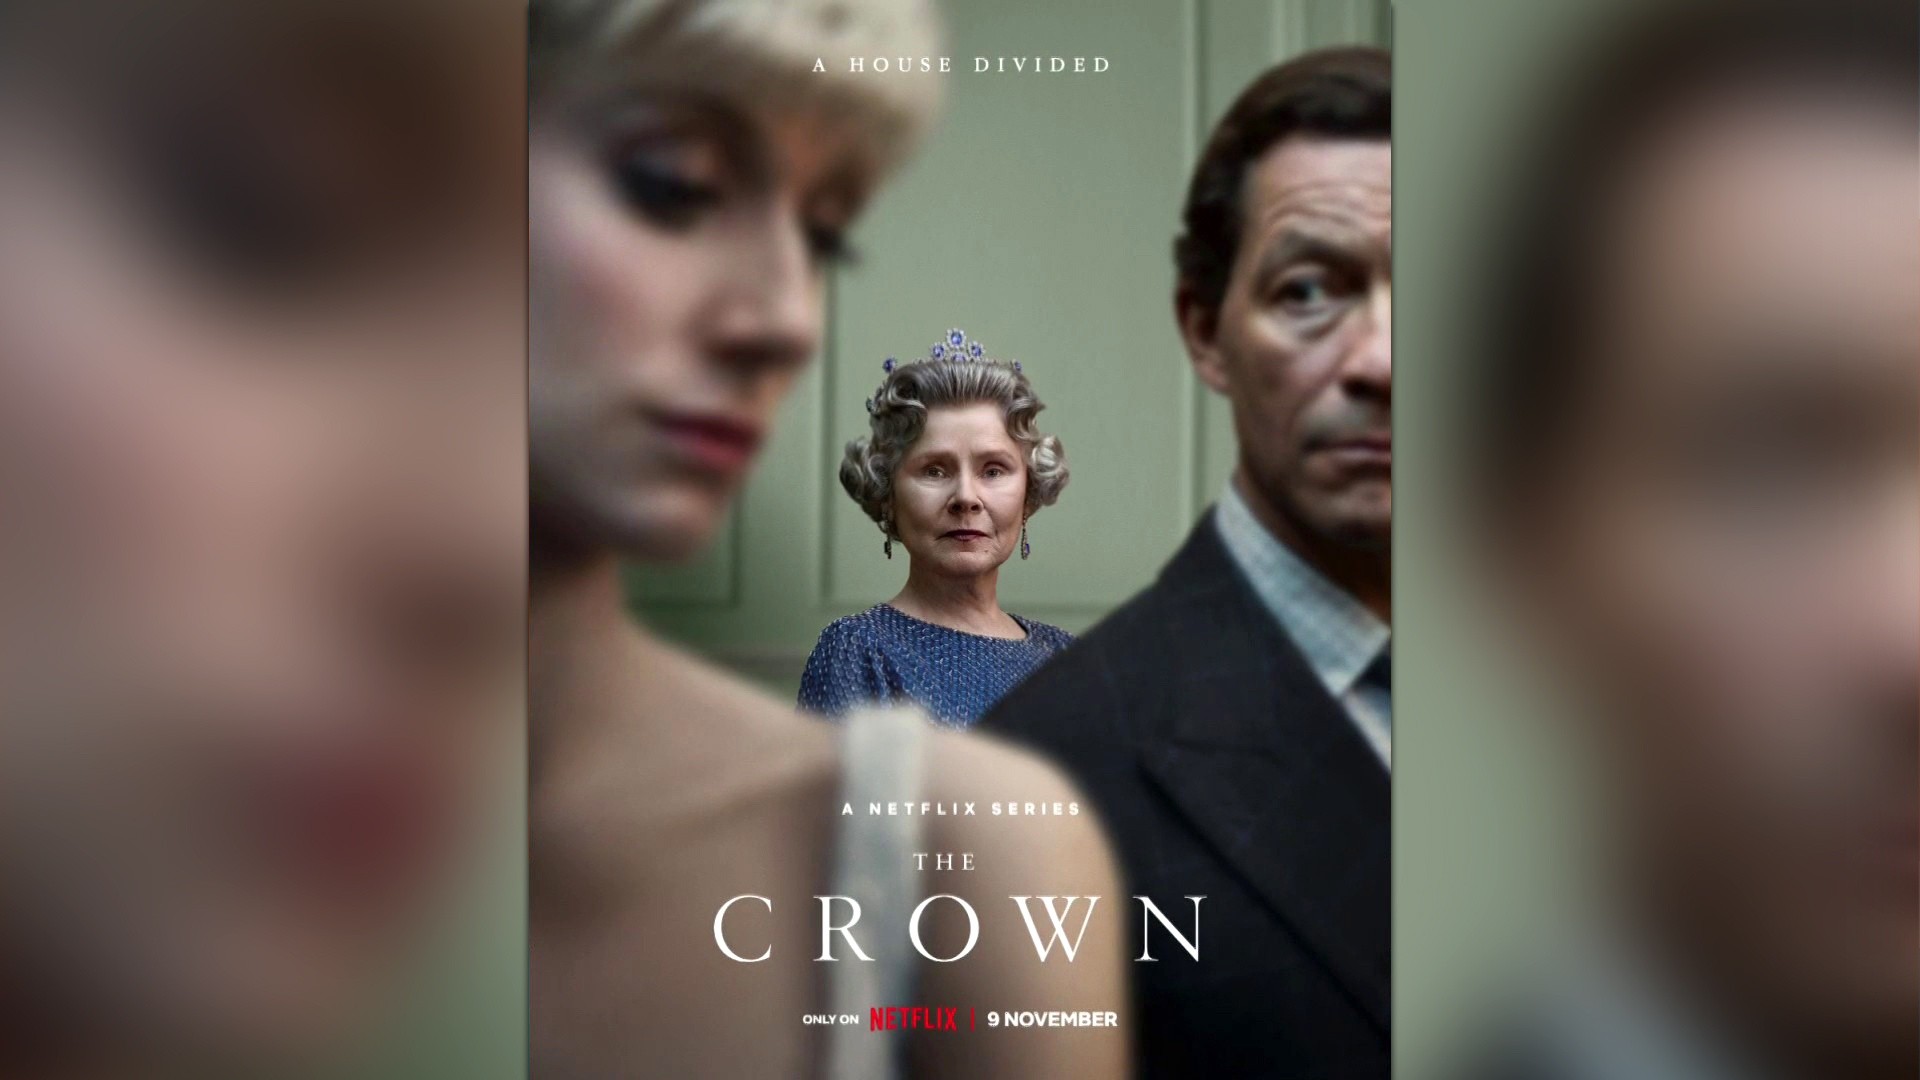 New Character Posters for Season 5 of 'The Crown' Show 'A House Divided'